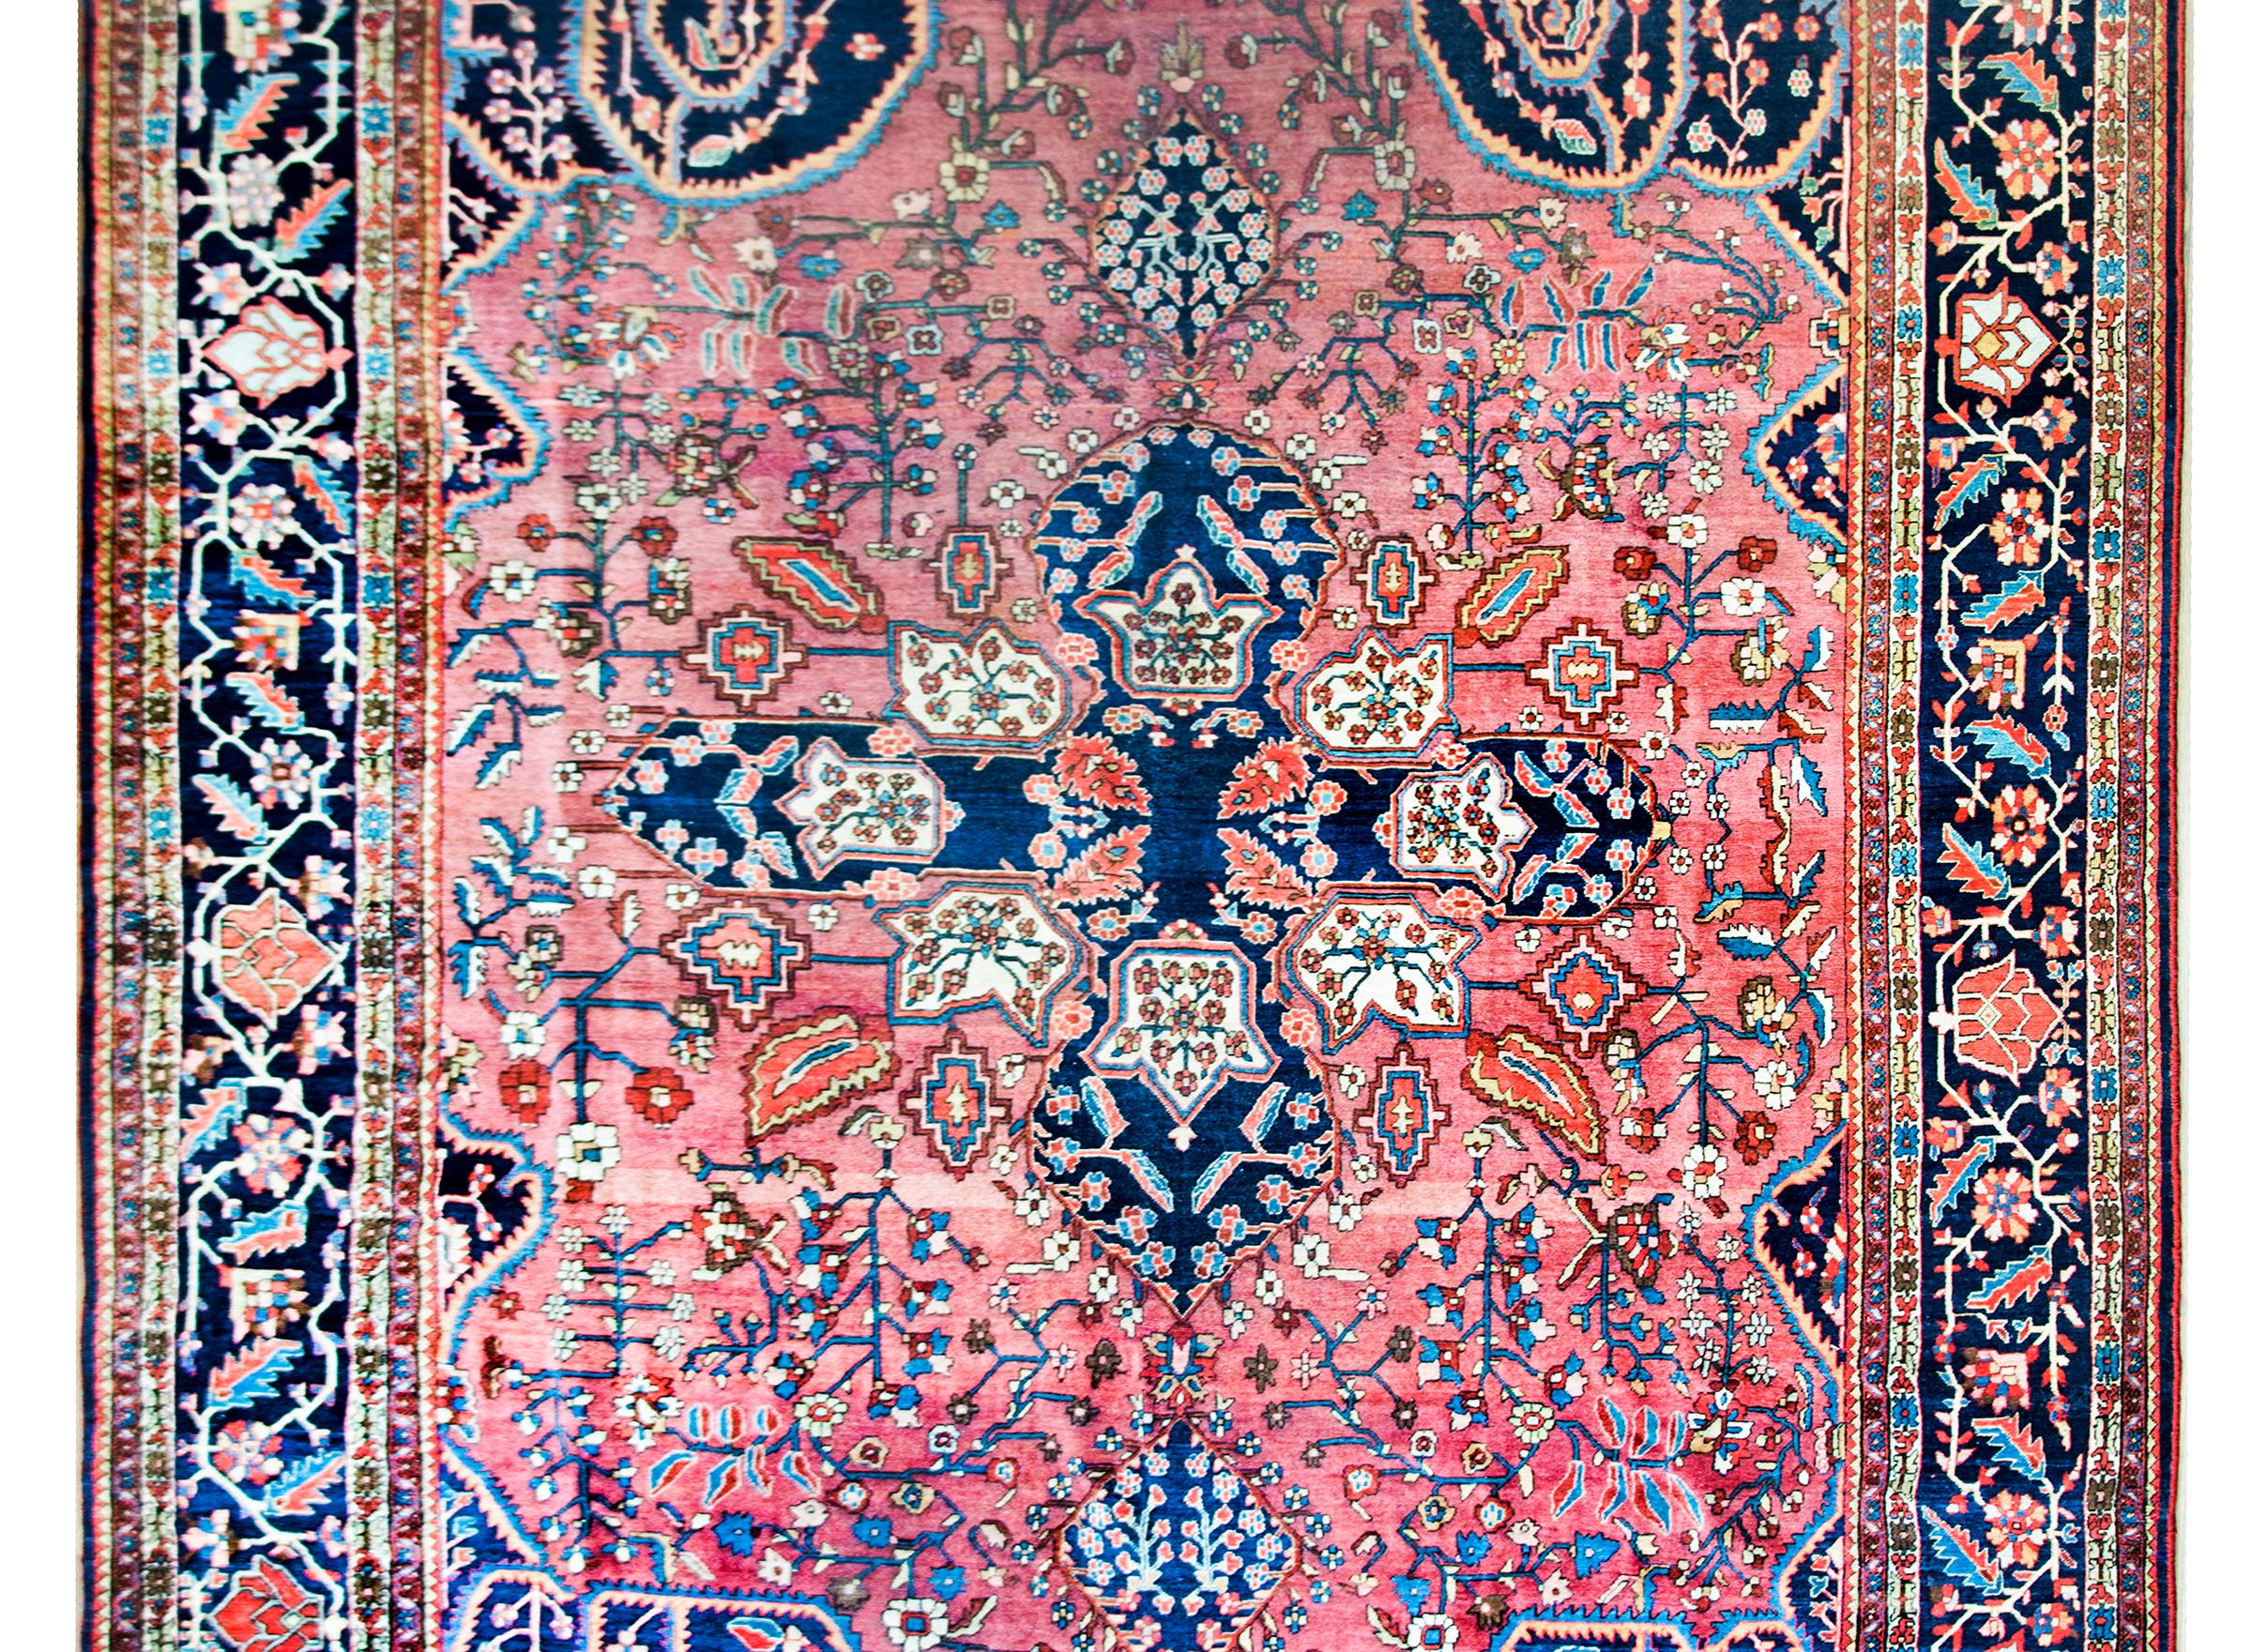 A remarkable early 20th century Persian Sarouk Farahan rug with the most memorable pattern we've seen in a long time. A large indigo cross-form medallion lives in the center of stylized scrolling vines and flowers with large spiral scrolled vines in